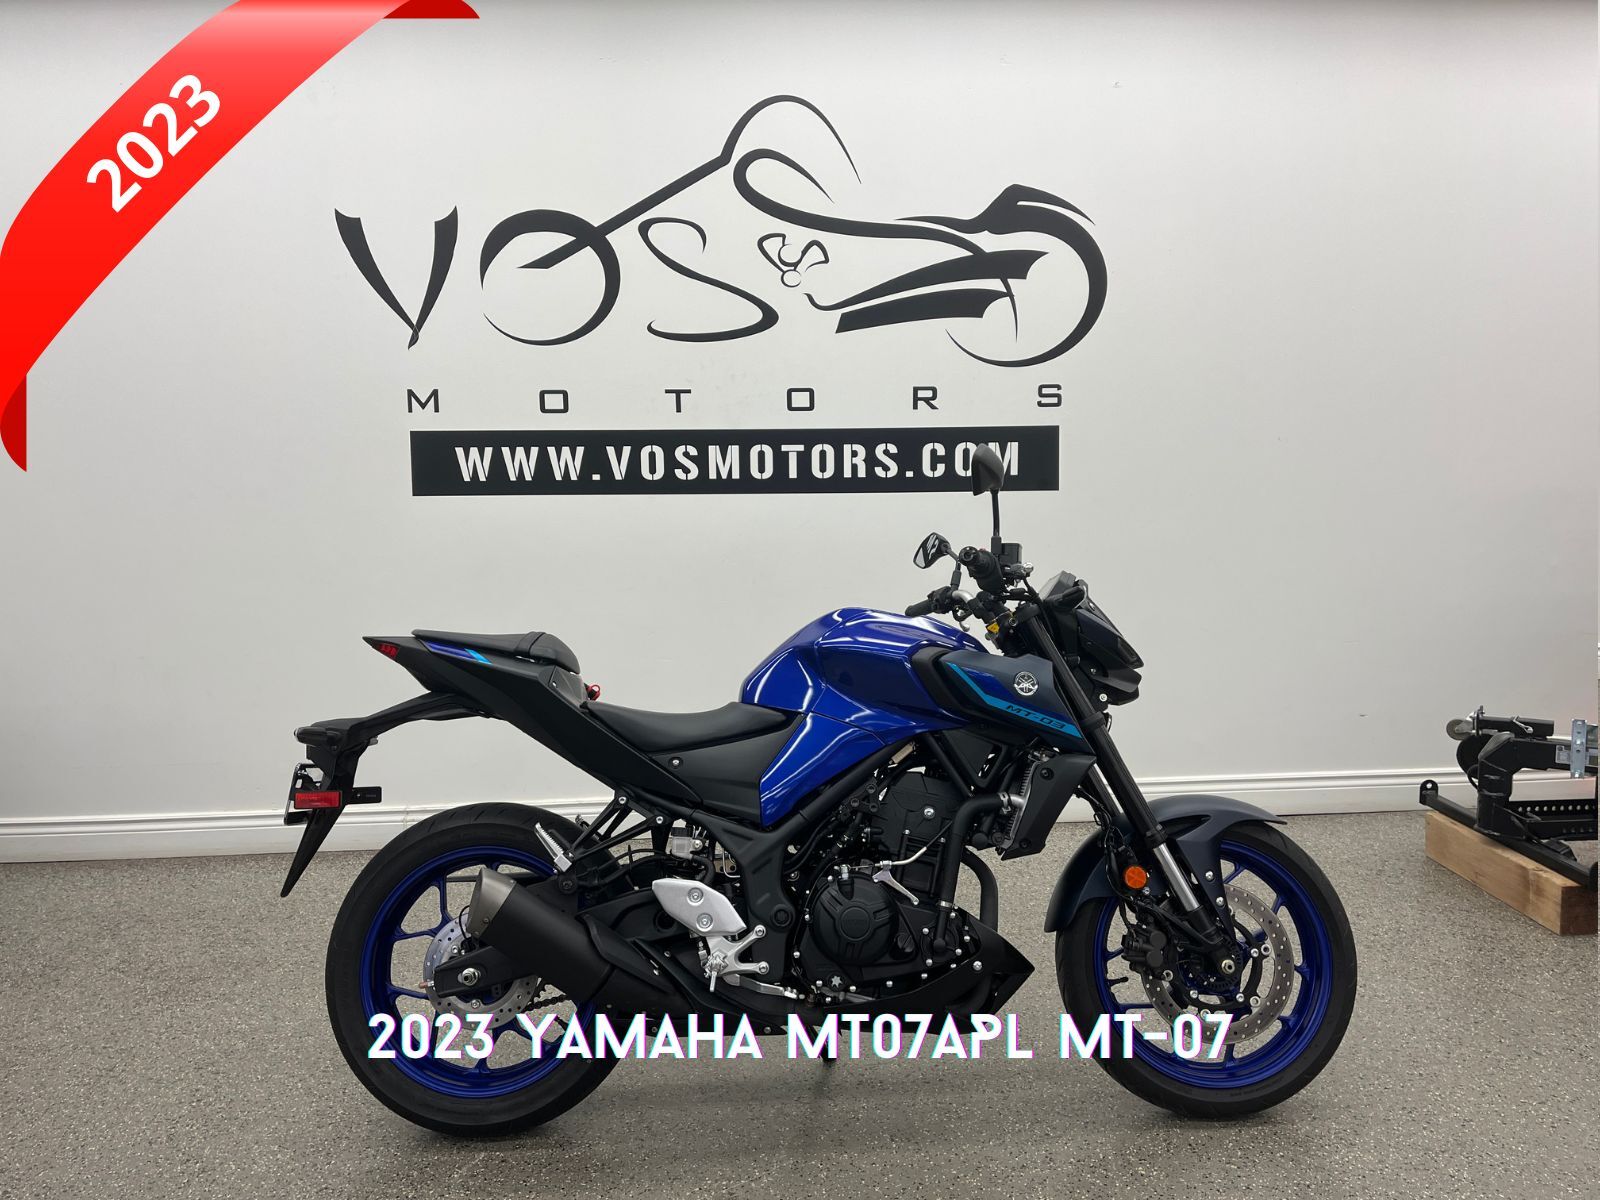 2023 Yamaha MT03APB MT-03 ABS - V5808NP - -No Payments for 1 Year**